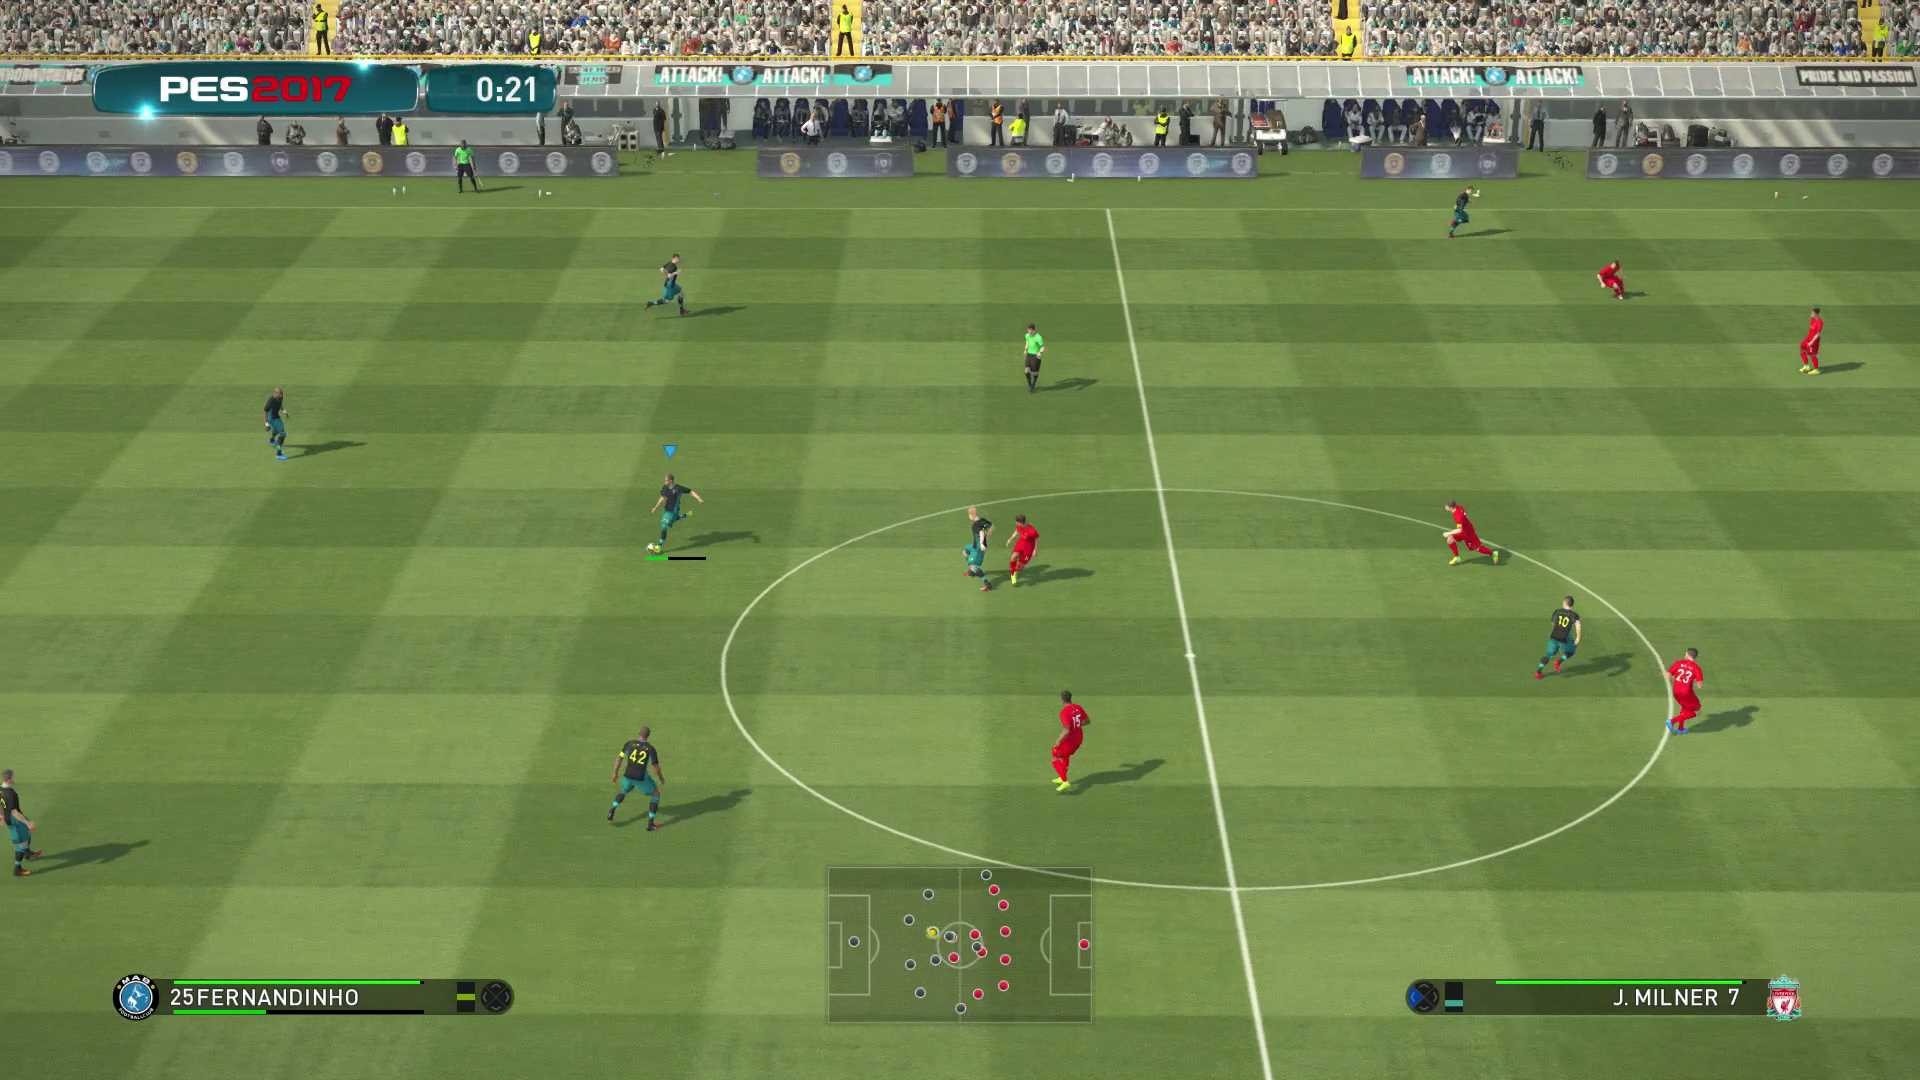 PES 2017 - Game Overview